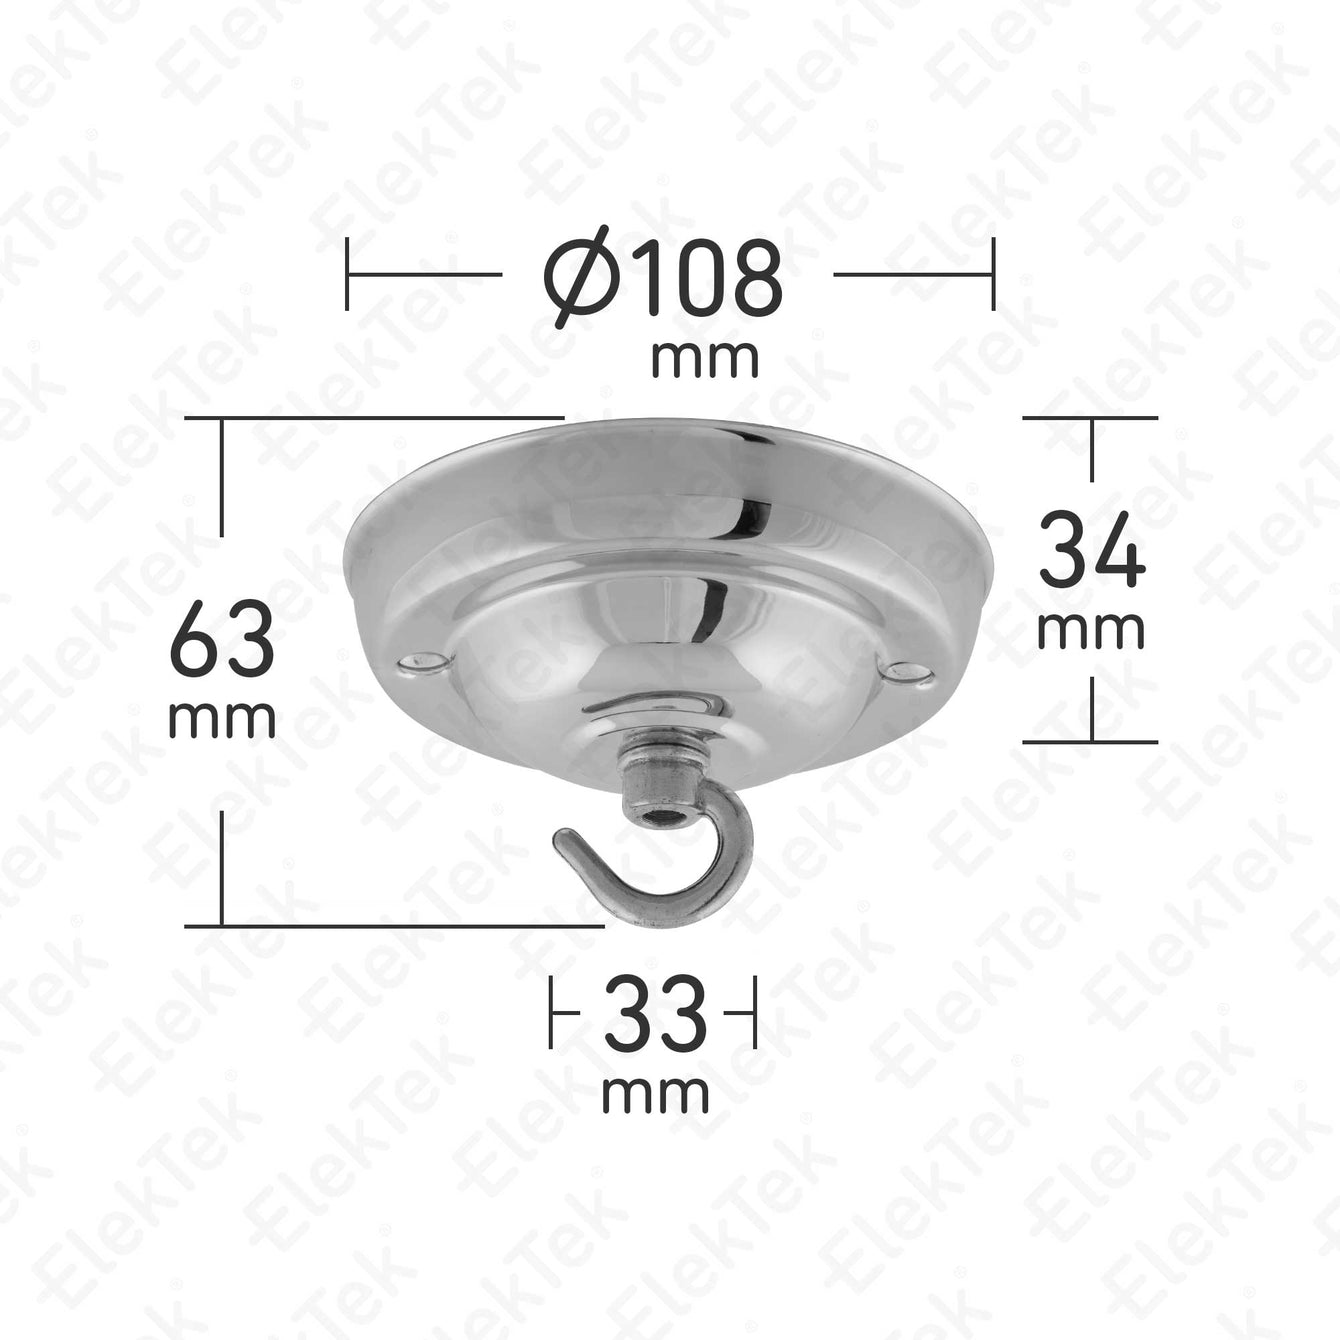 ElekTek 108mm Diameter Ceiling Rose with Hook Metallic Finishes Powder Coated Colours For Light Fittings and Chandeliers Chrome